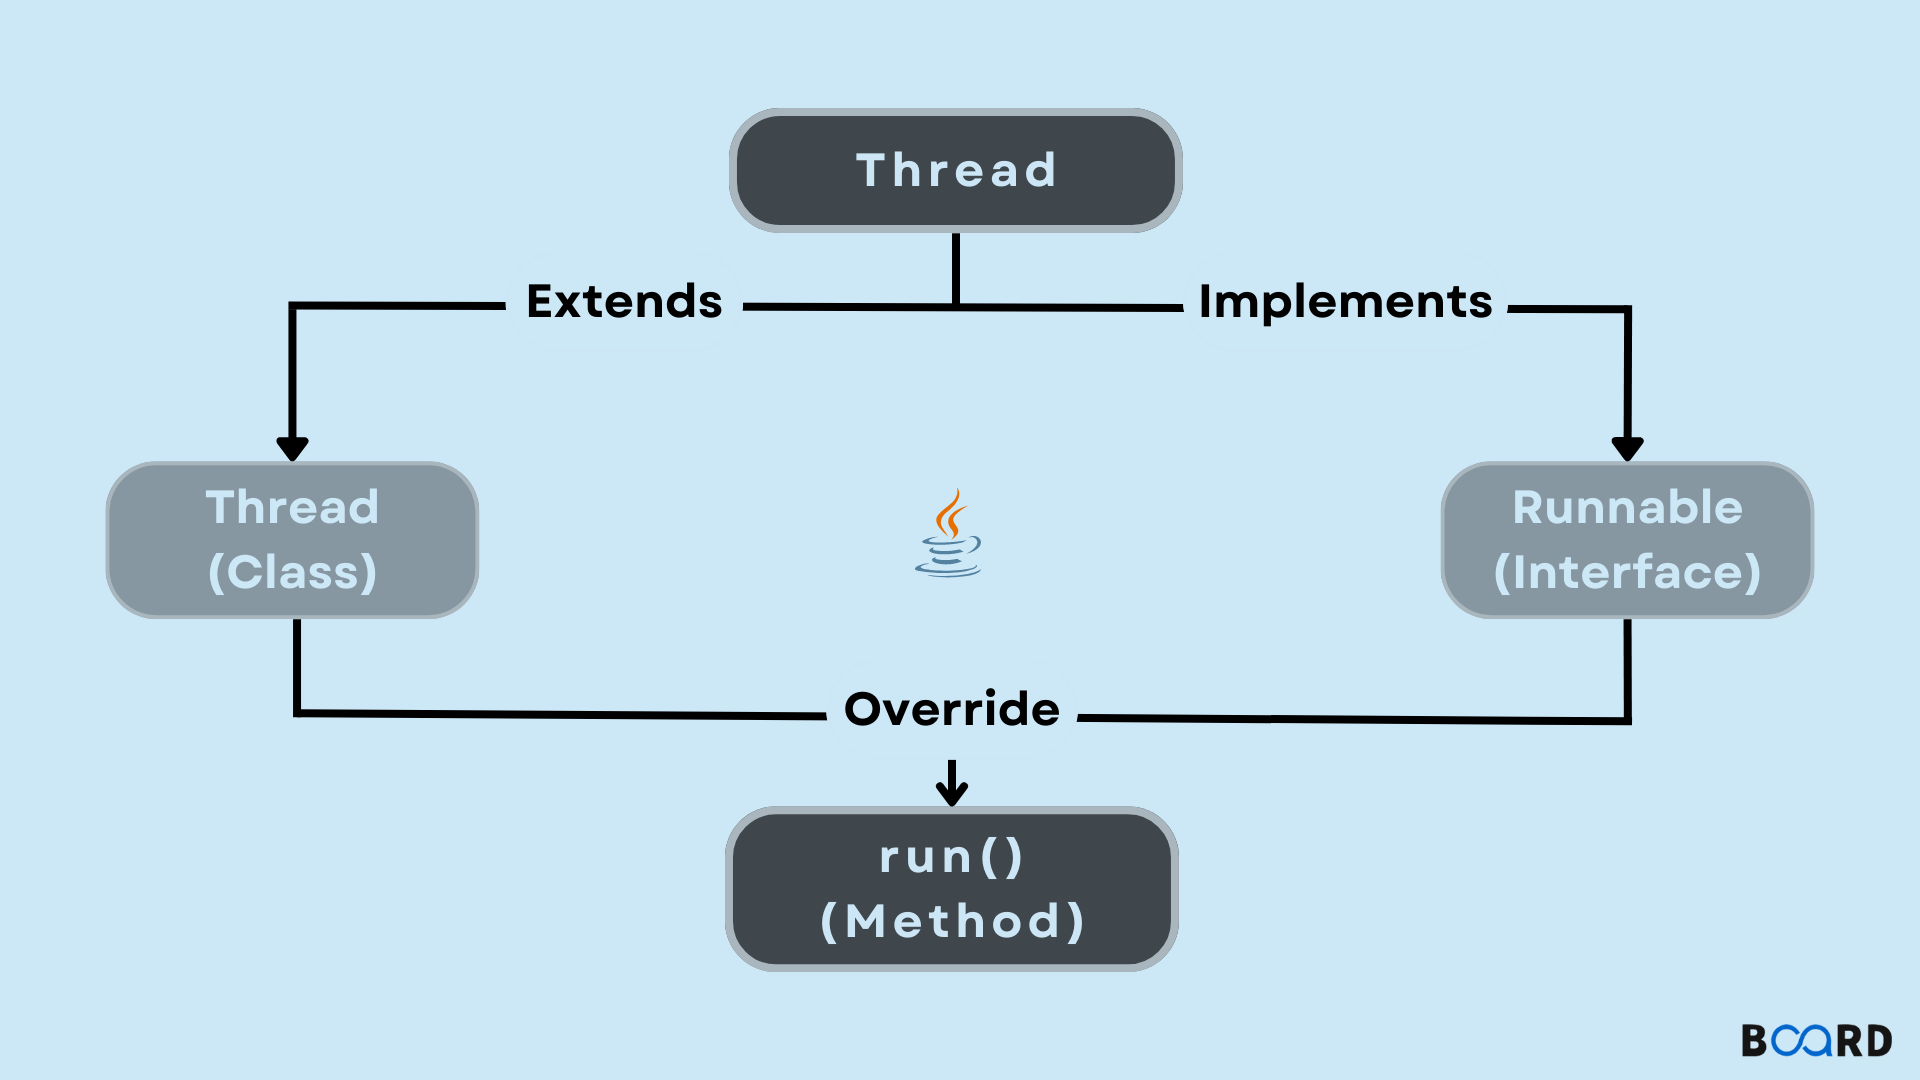 What is the Difference Between Extends and Implements in Java